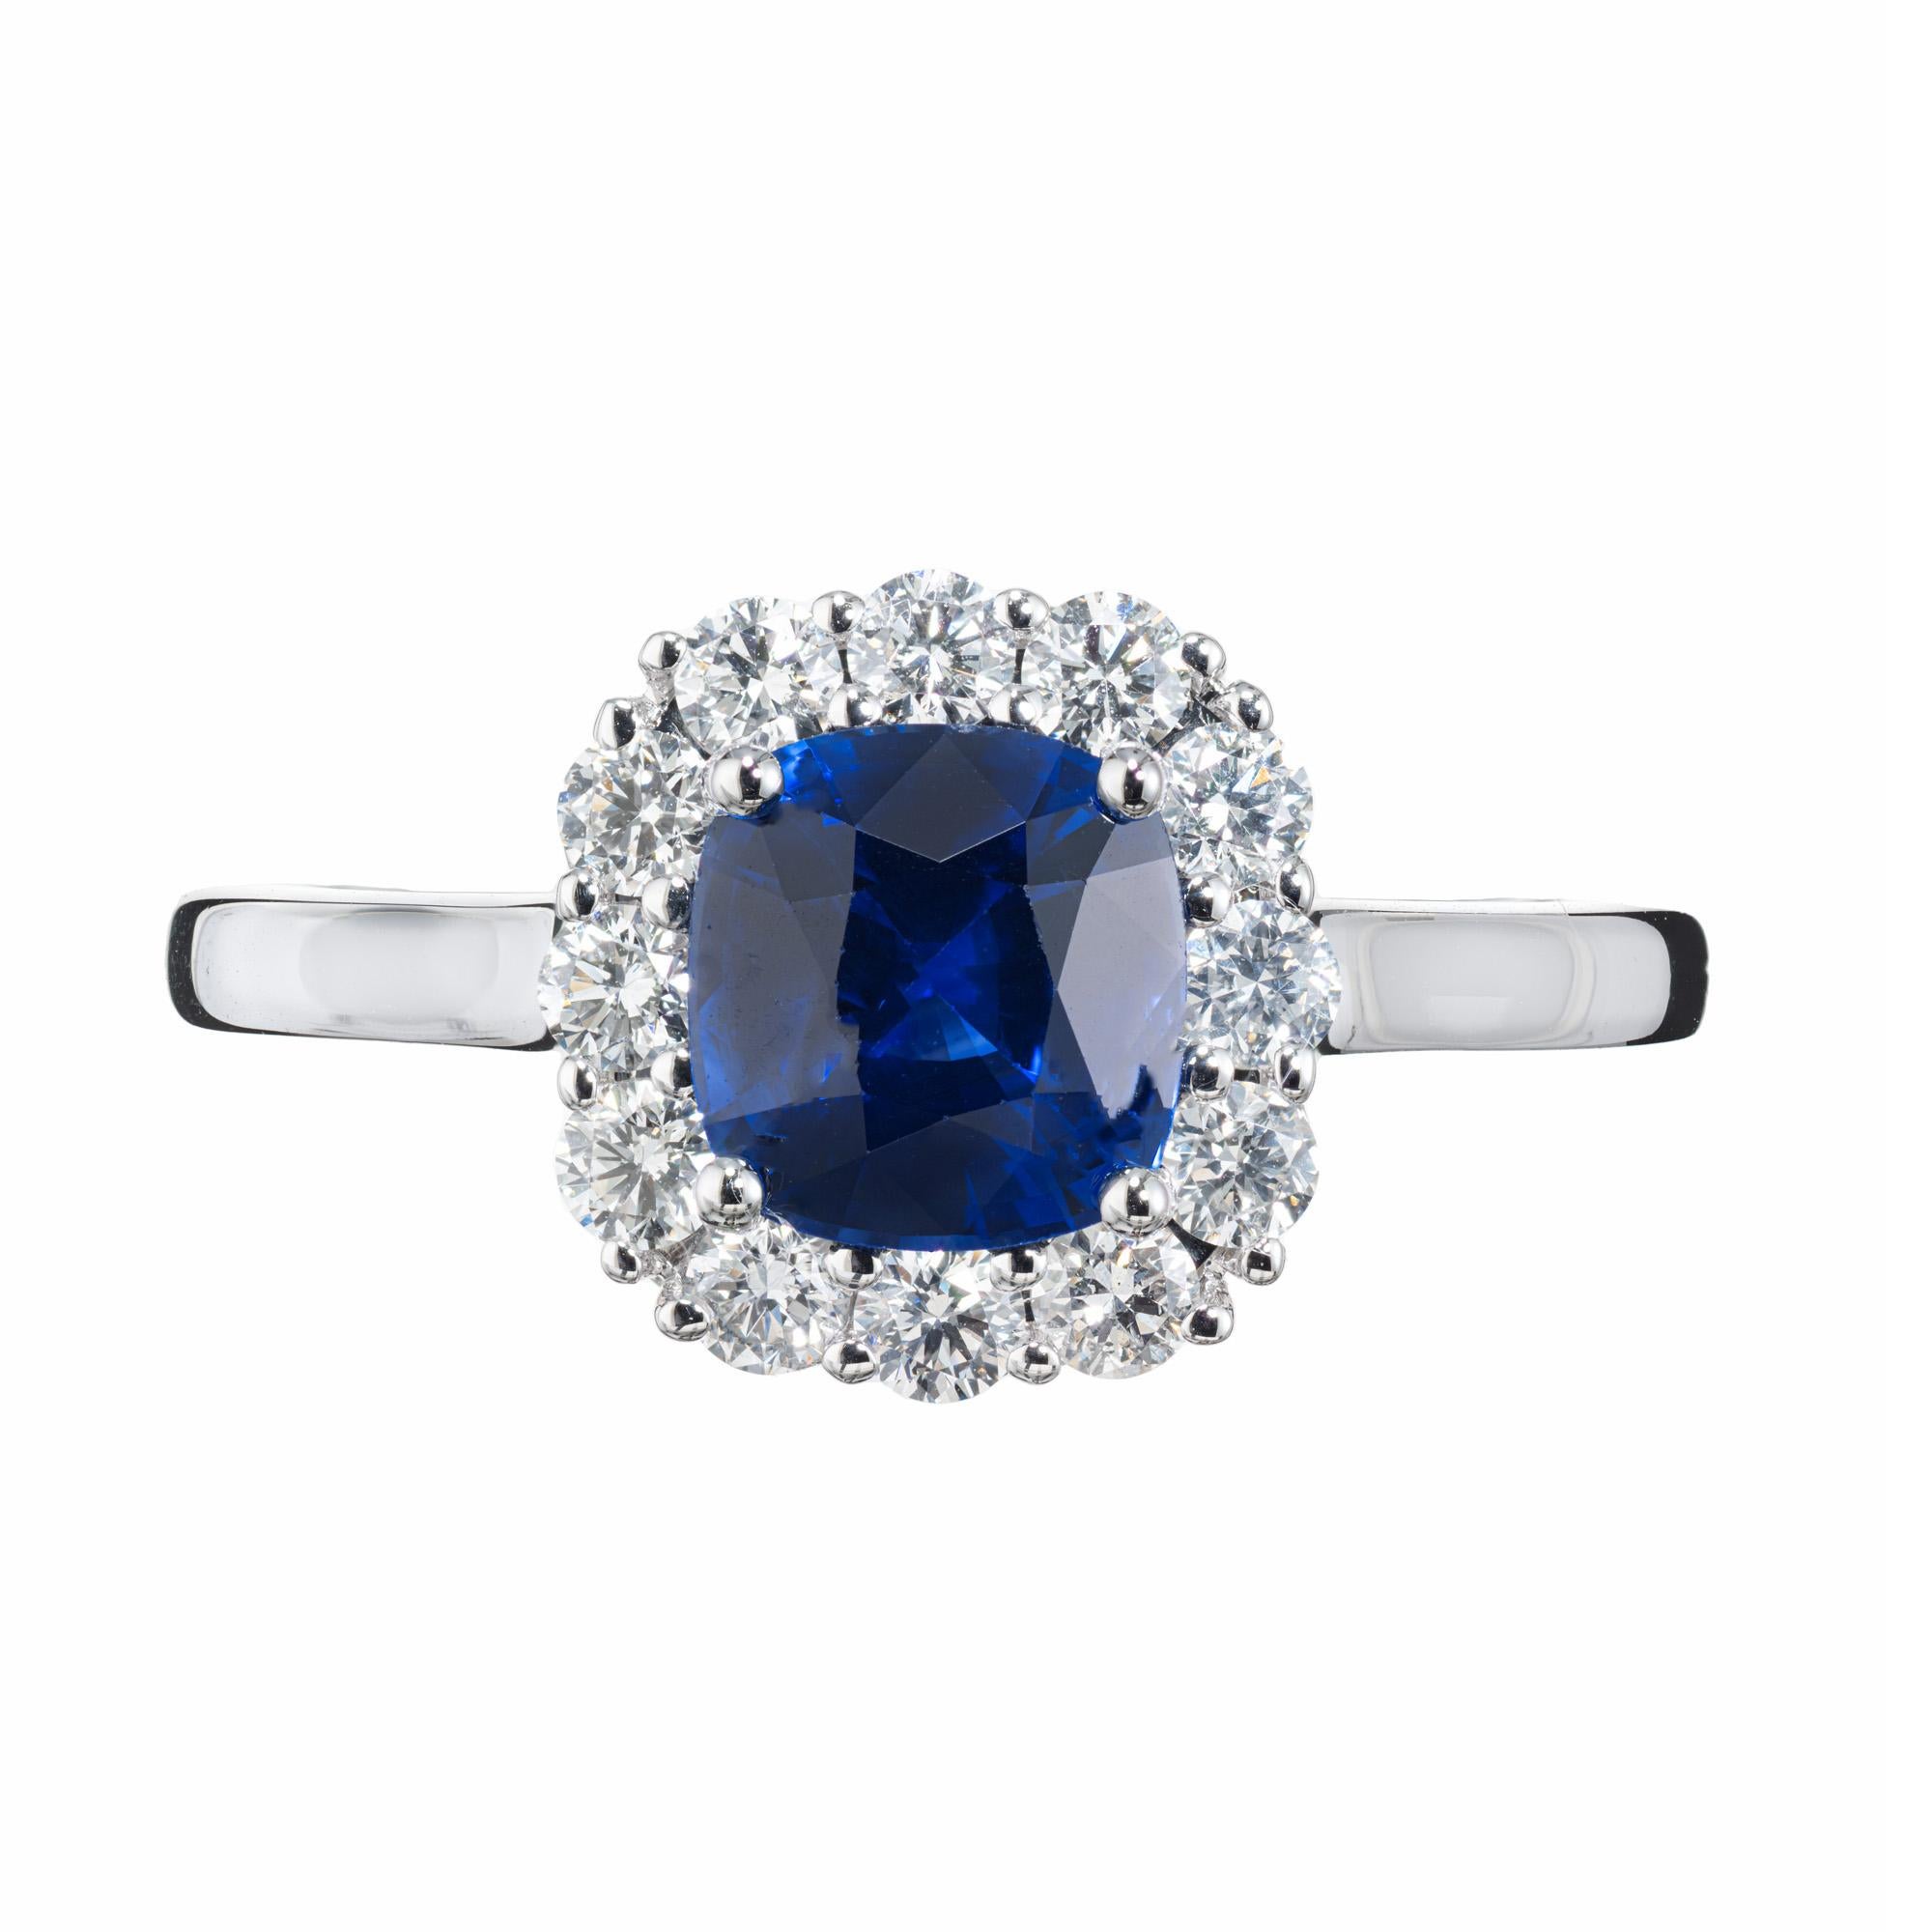 Sapphire Diamond Halo Gold Engagement Ring. Crafted with precision and elegance, the center stone is a stunning 1.33 carat GIA certified cushion cut sapphire that radiates with a deep rich blue. Surrounded by a halo of 12 sparkling round brilliant